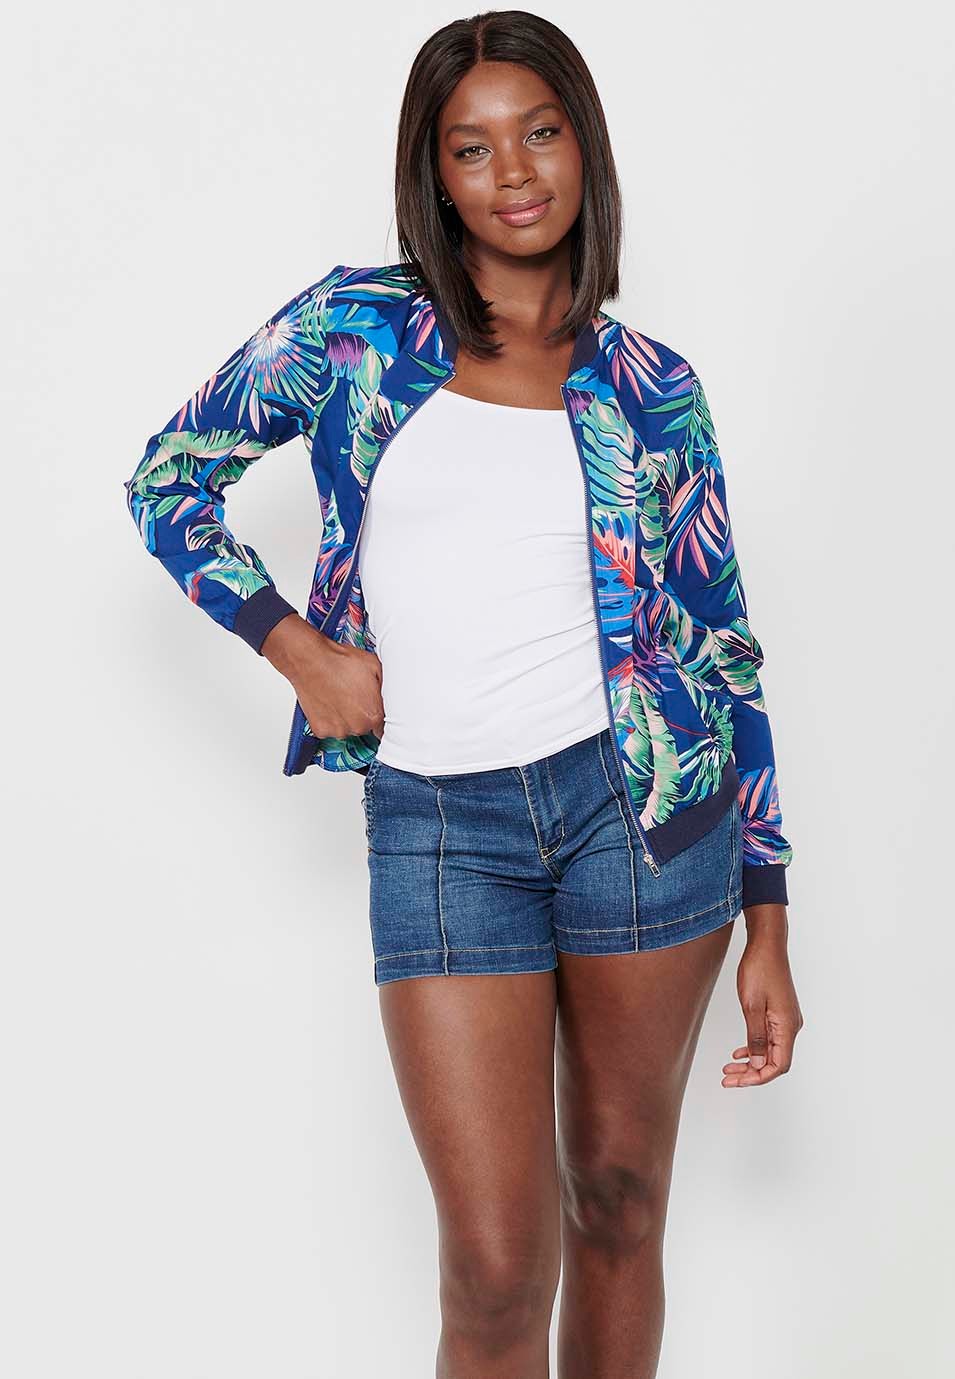 Long-sleeved sweatshirt jacket with blue floral print for women